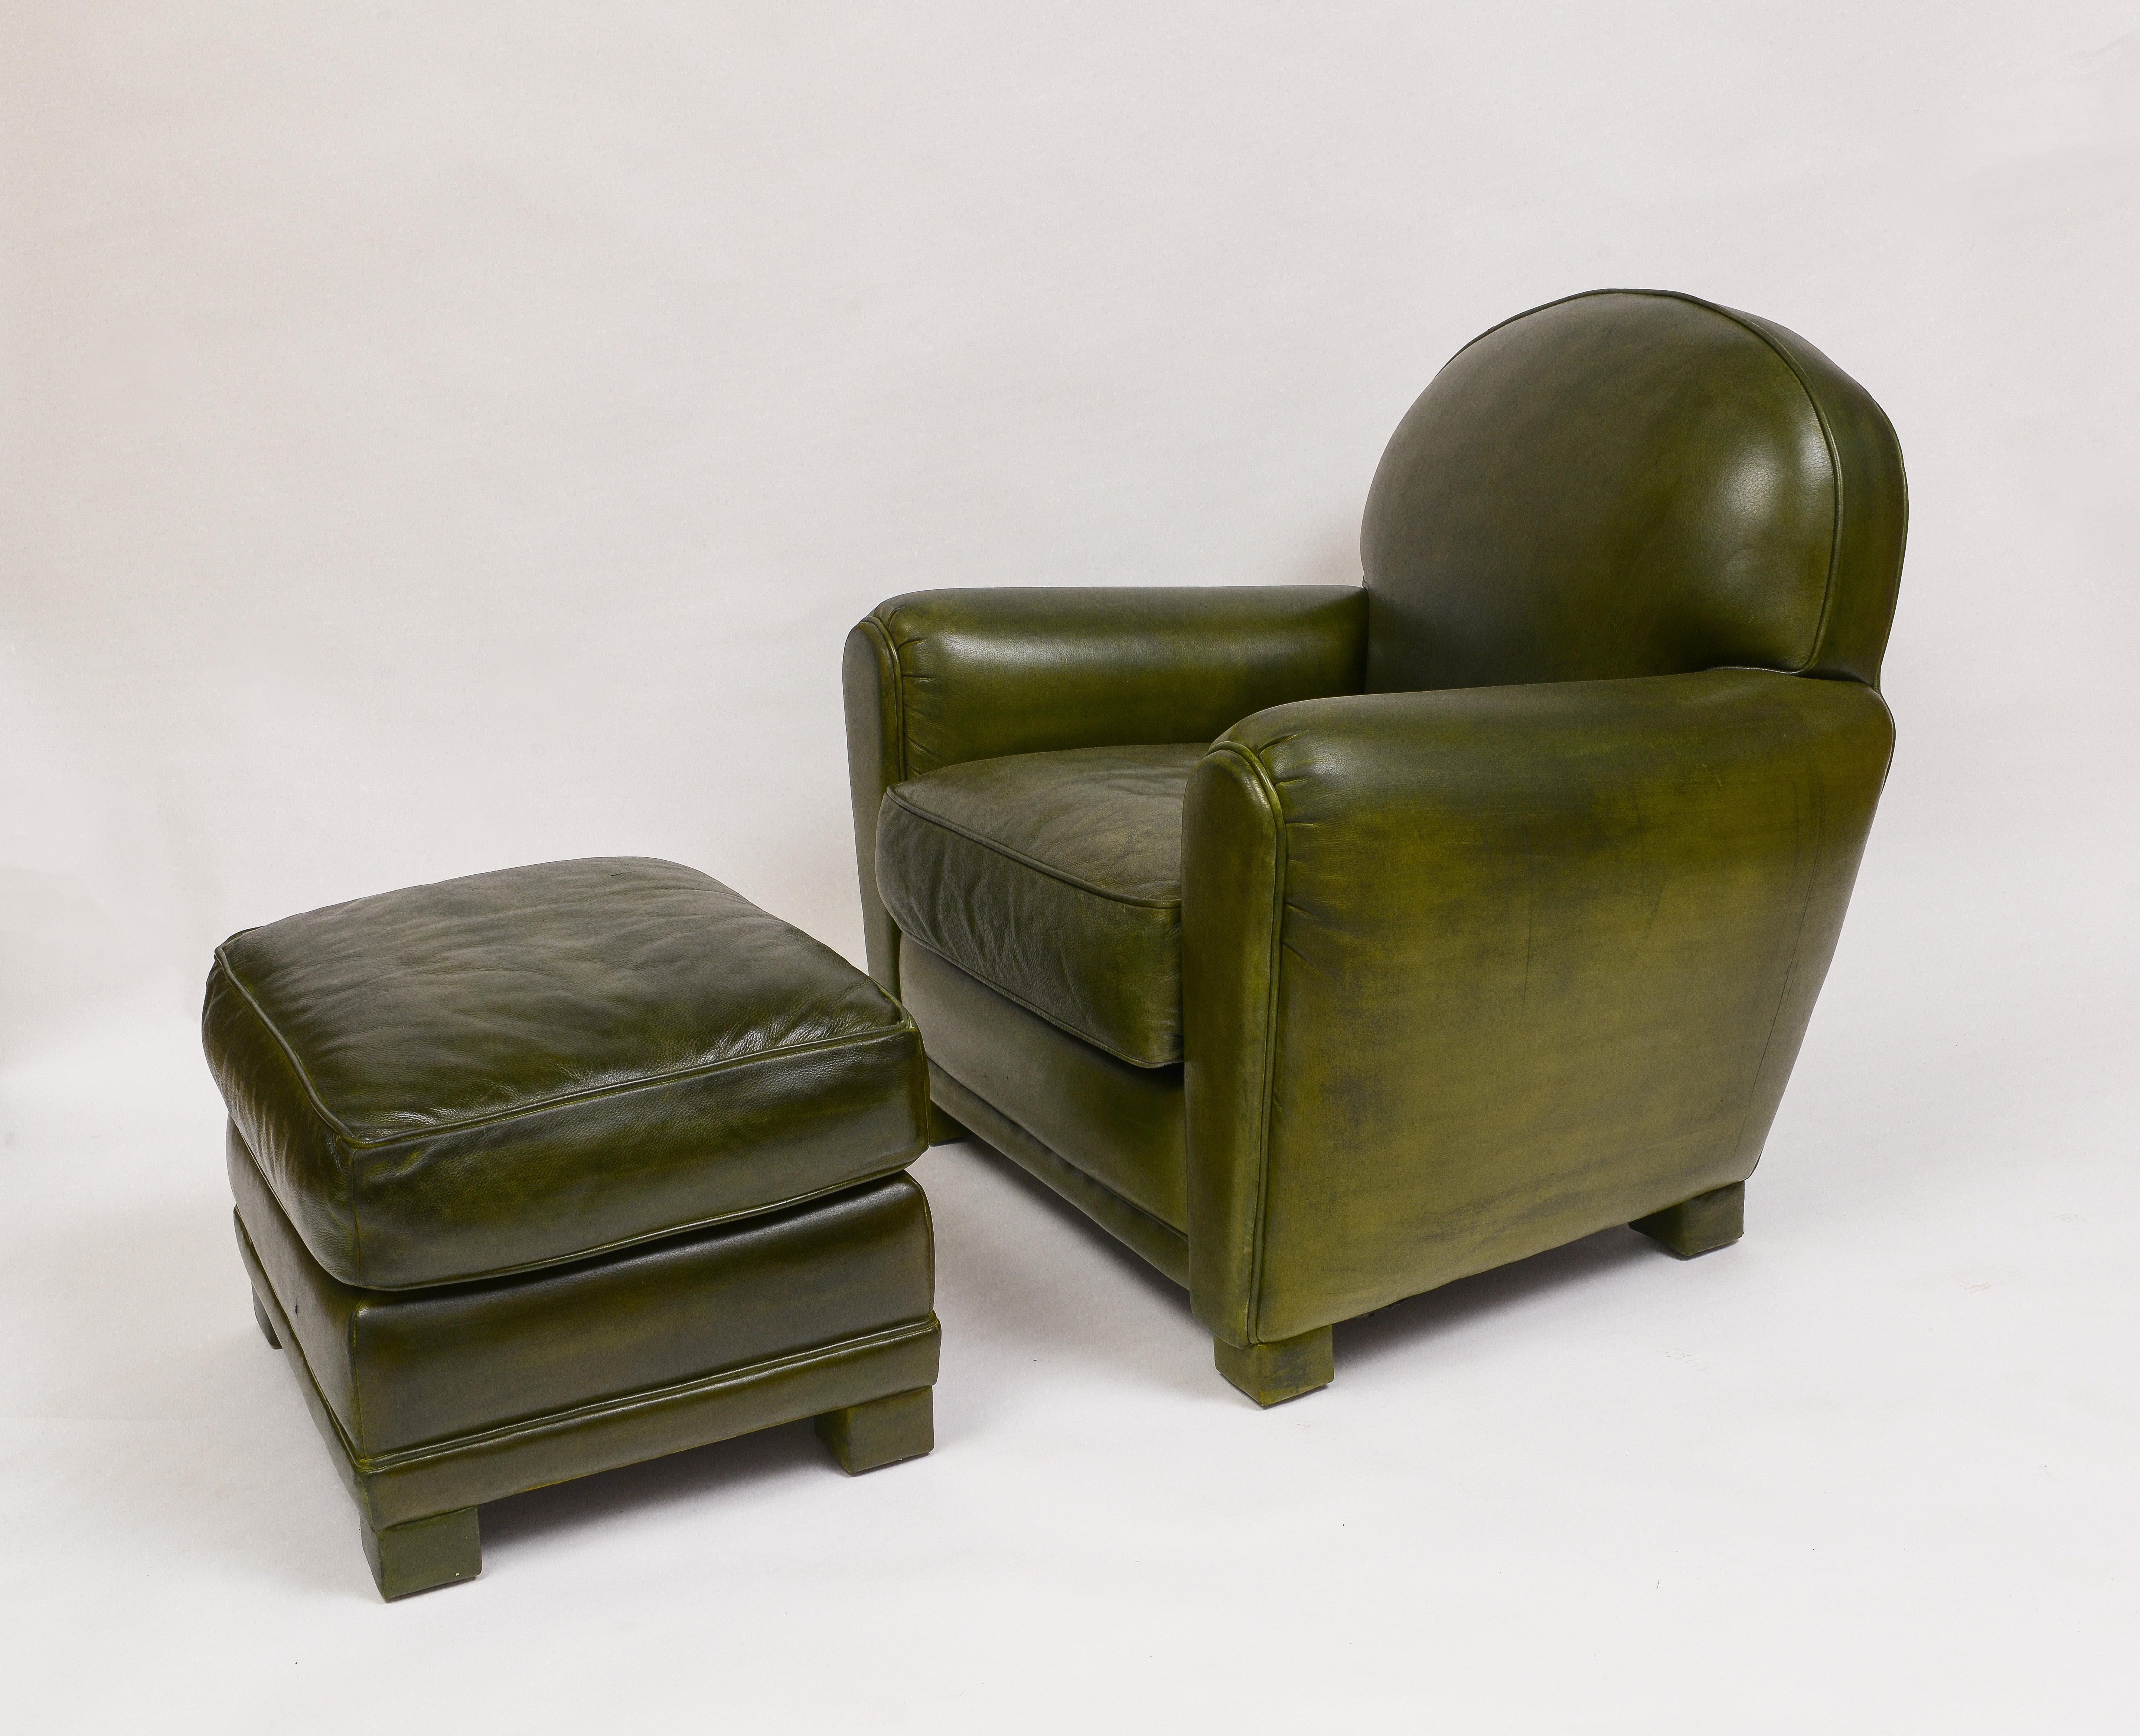 A pair of club chairs with matching ottomans by Grange
Very comfortable chairs dyed green
Arm chairs supported by square leather wrapped legs
Removable cushions on chairs - cushions fixed on the ottomans
Pair of Ottomans are W 18” x L 22” x H 15”